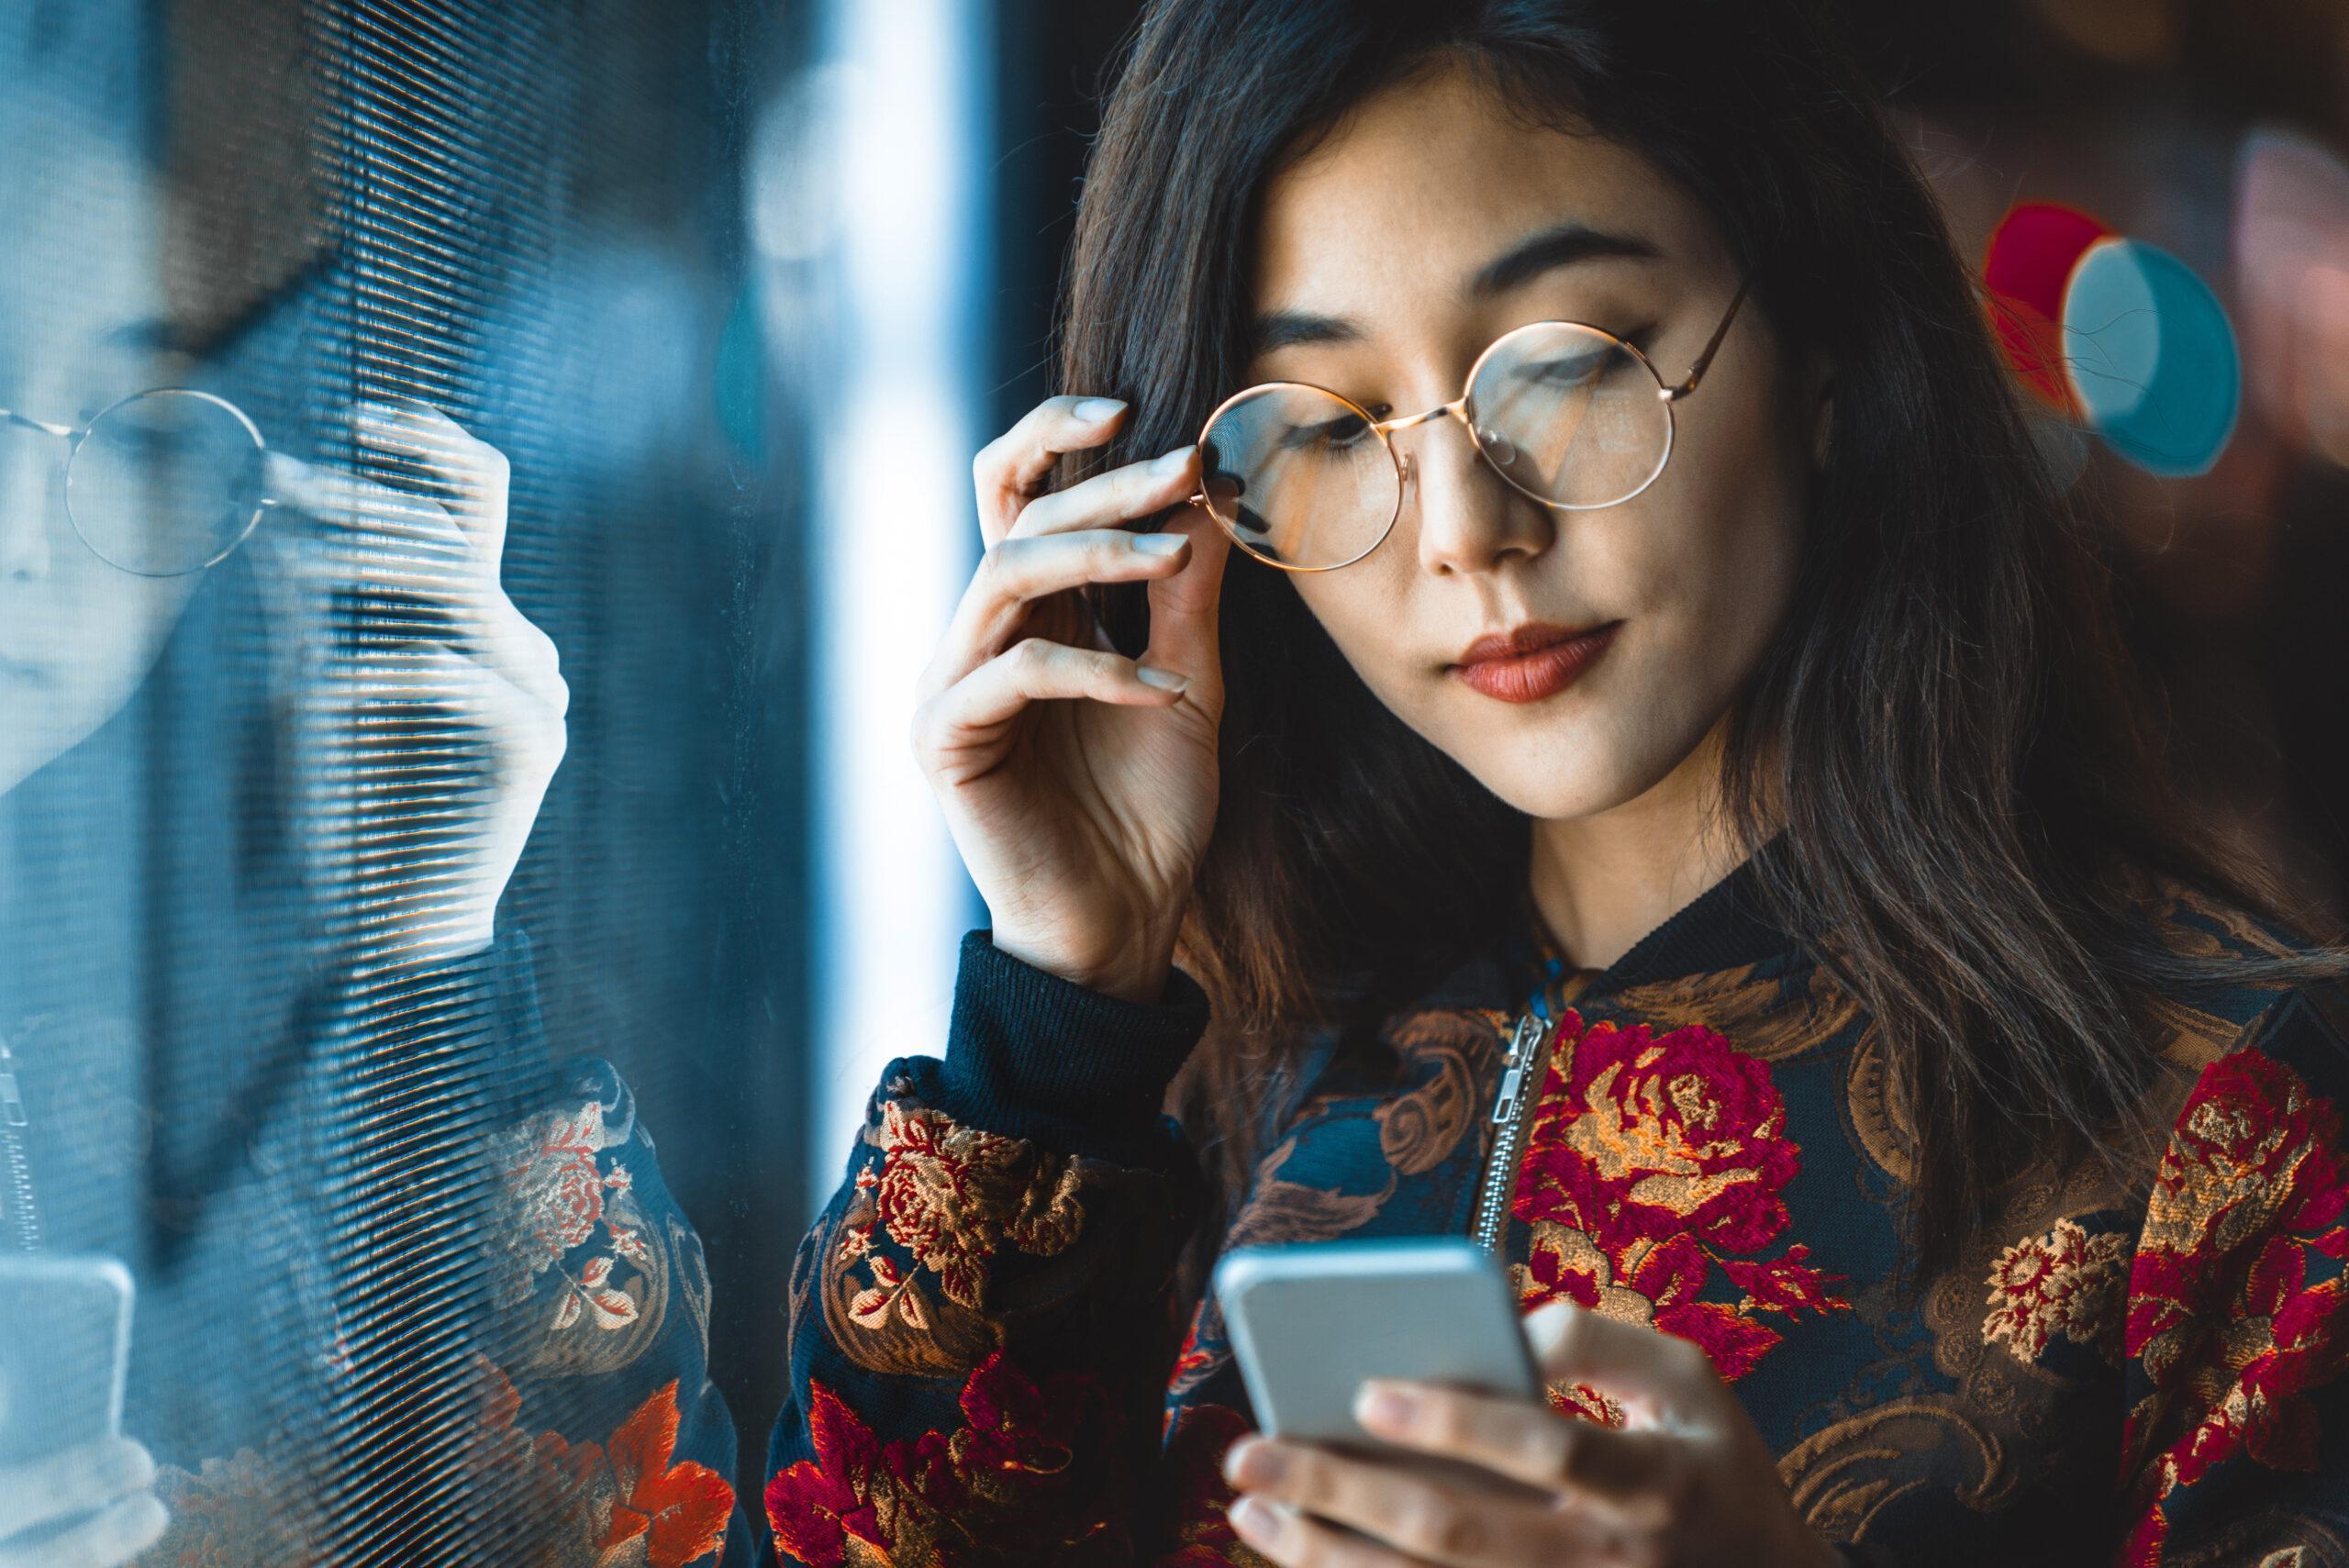 Pretty Asian woman  in a bright red blouse looking at her phone by a window